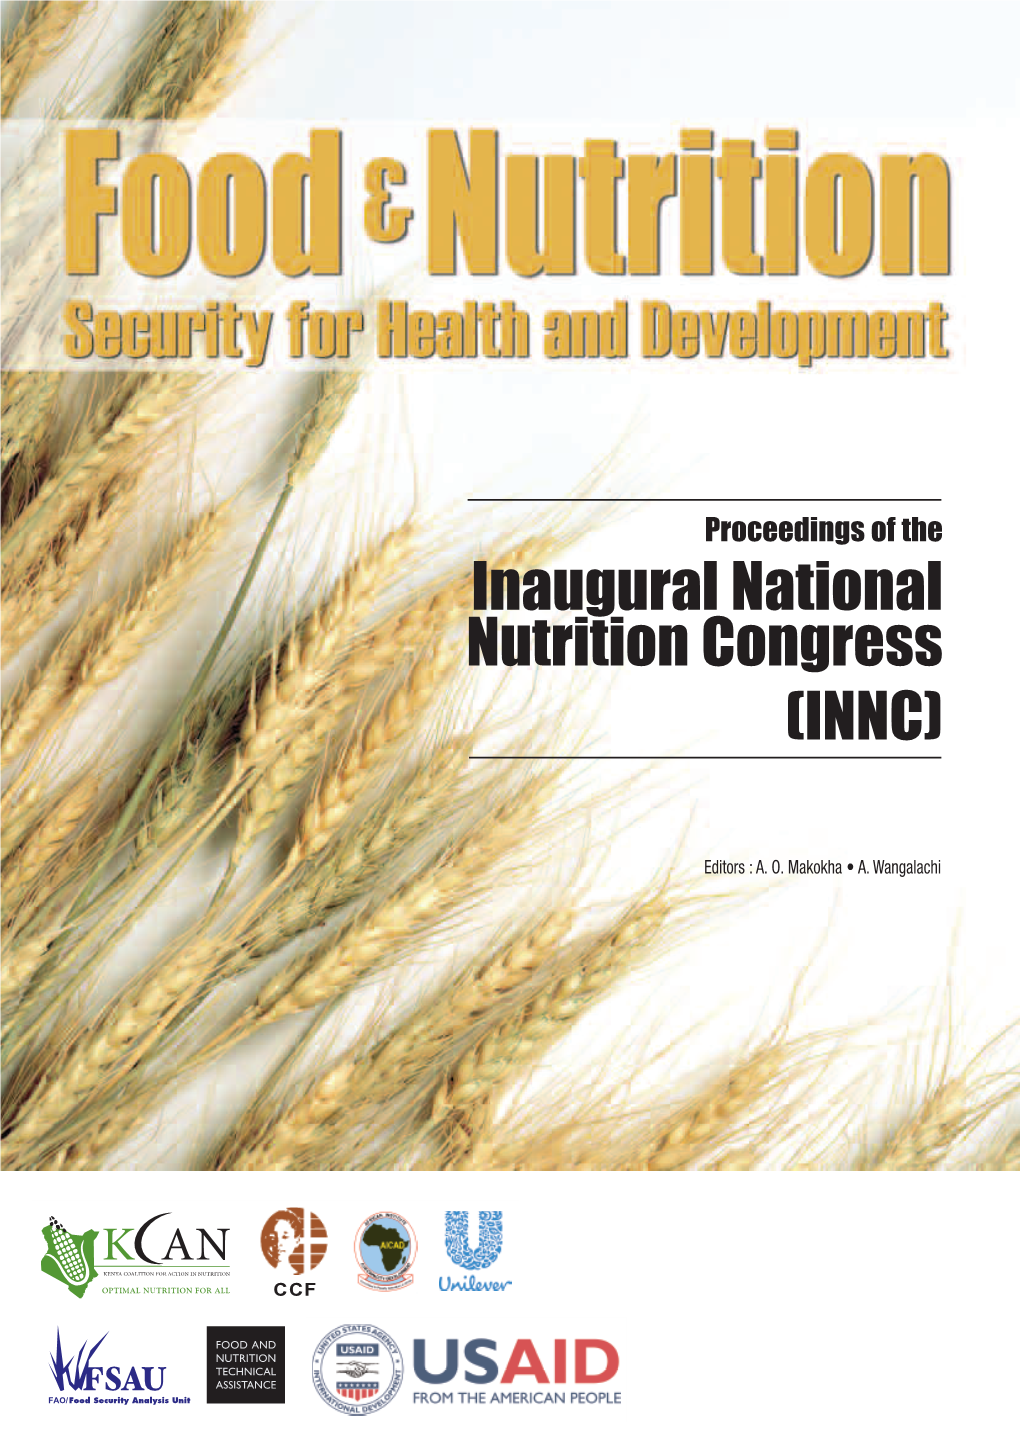 Food and Nutrition Security.Pdf (2.713Mb)